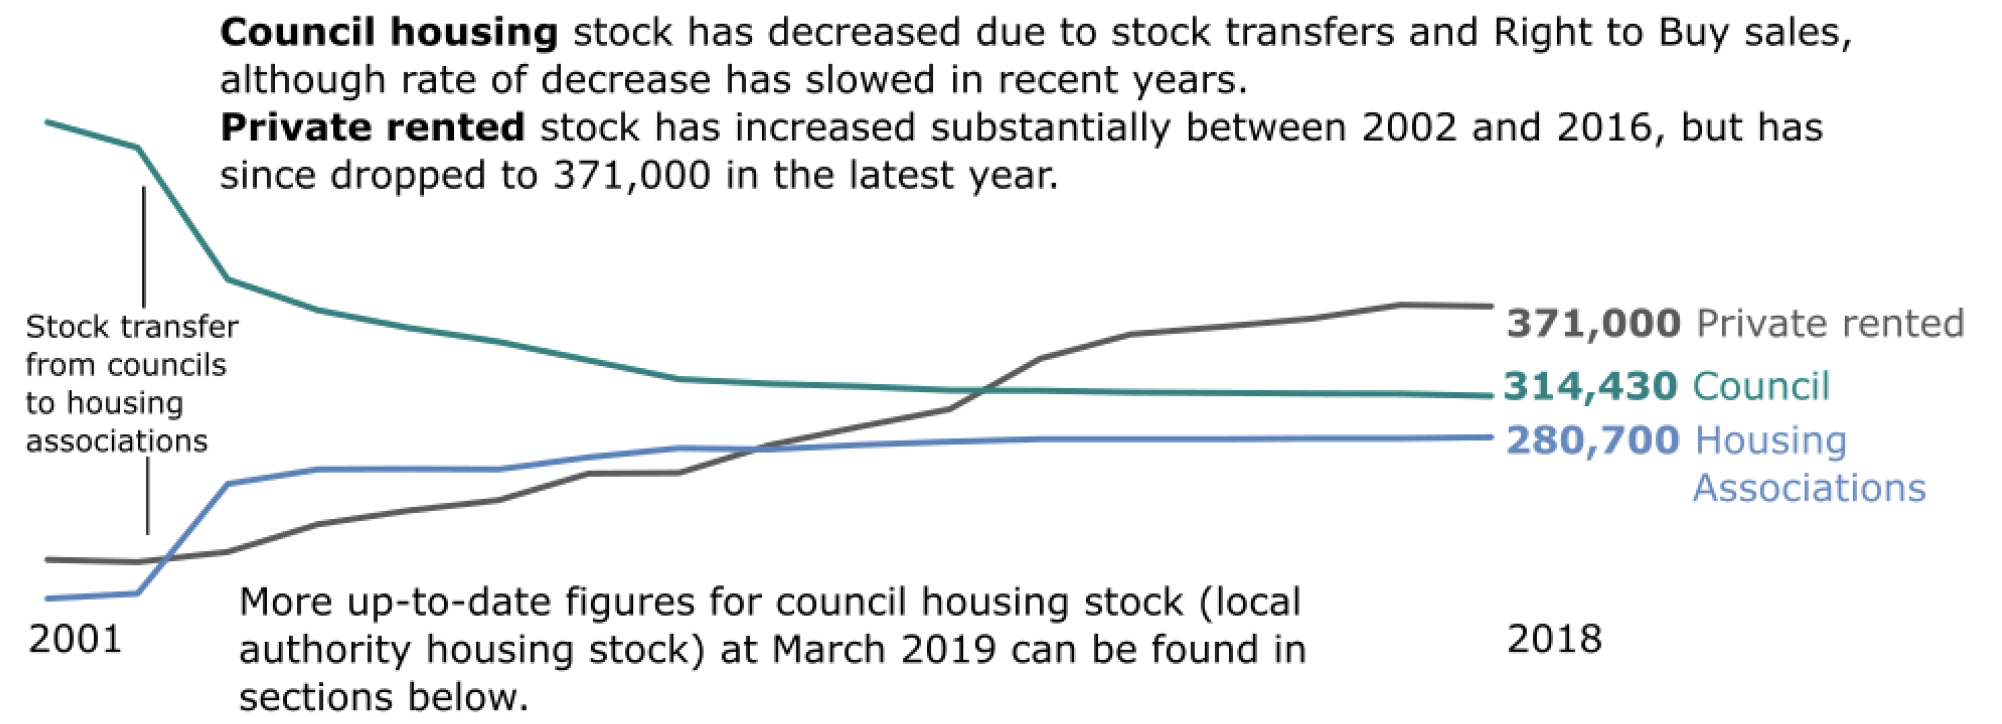 Chart 6a: Private rented stock increased substantially between 2002 and 2016, but has since dropped to 370,500 in the latest year